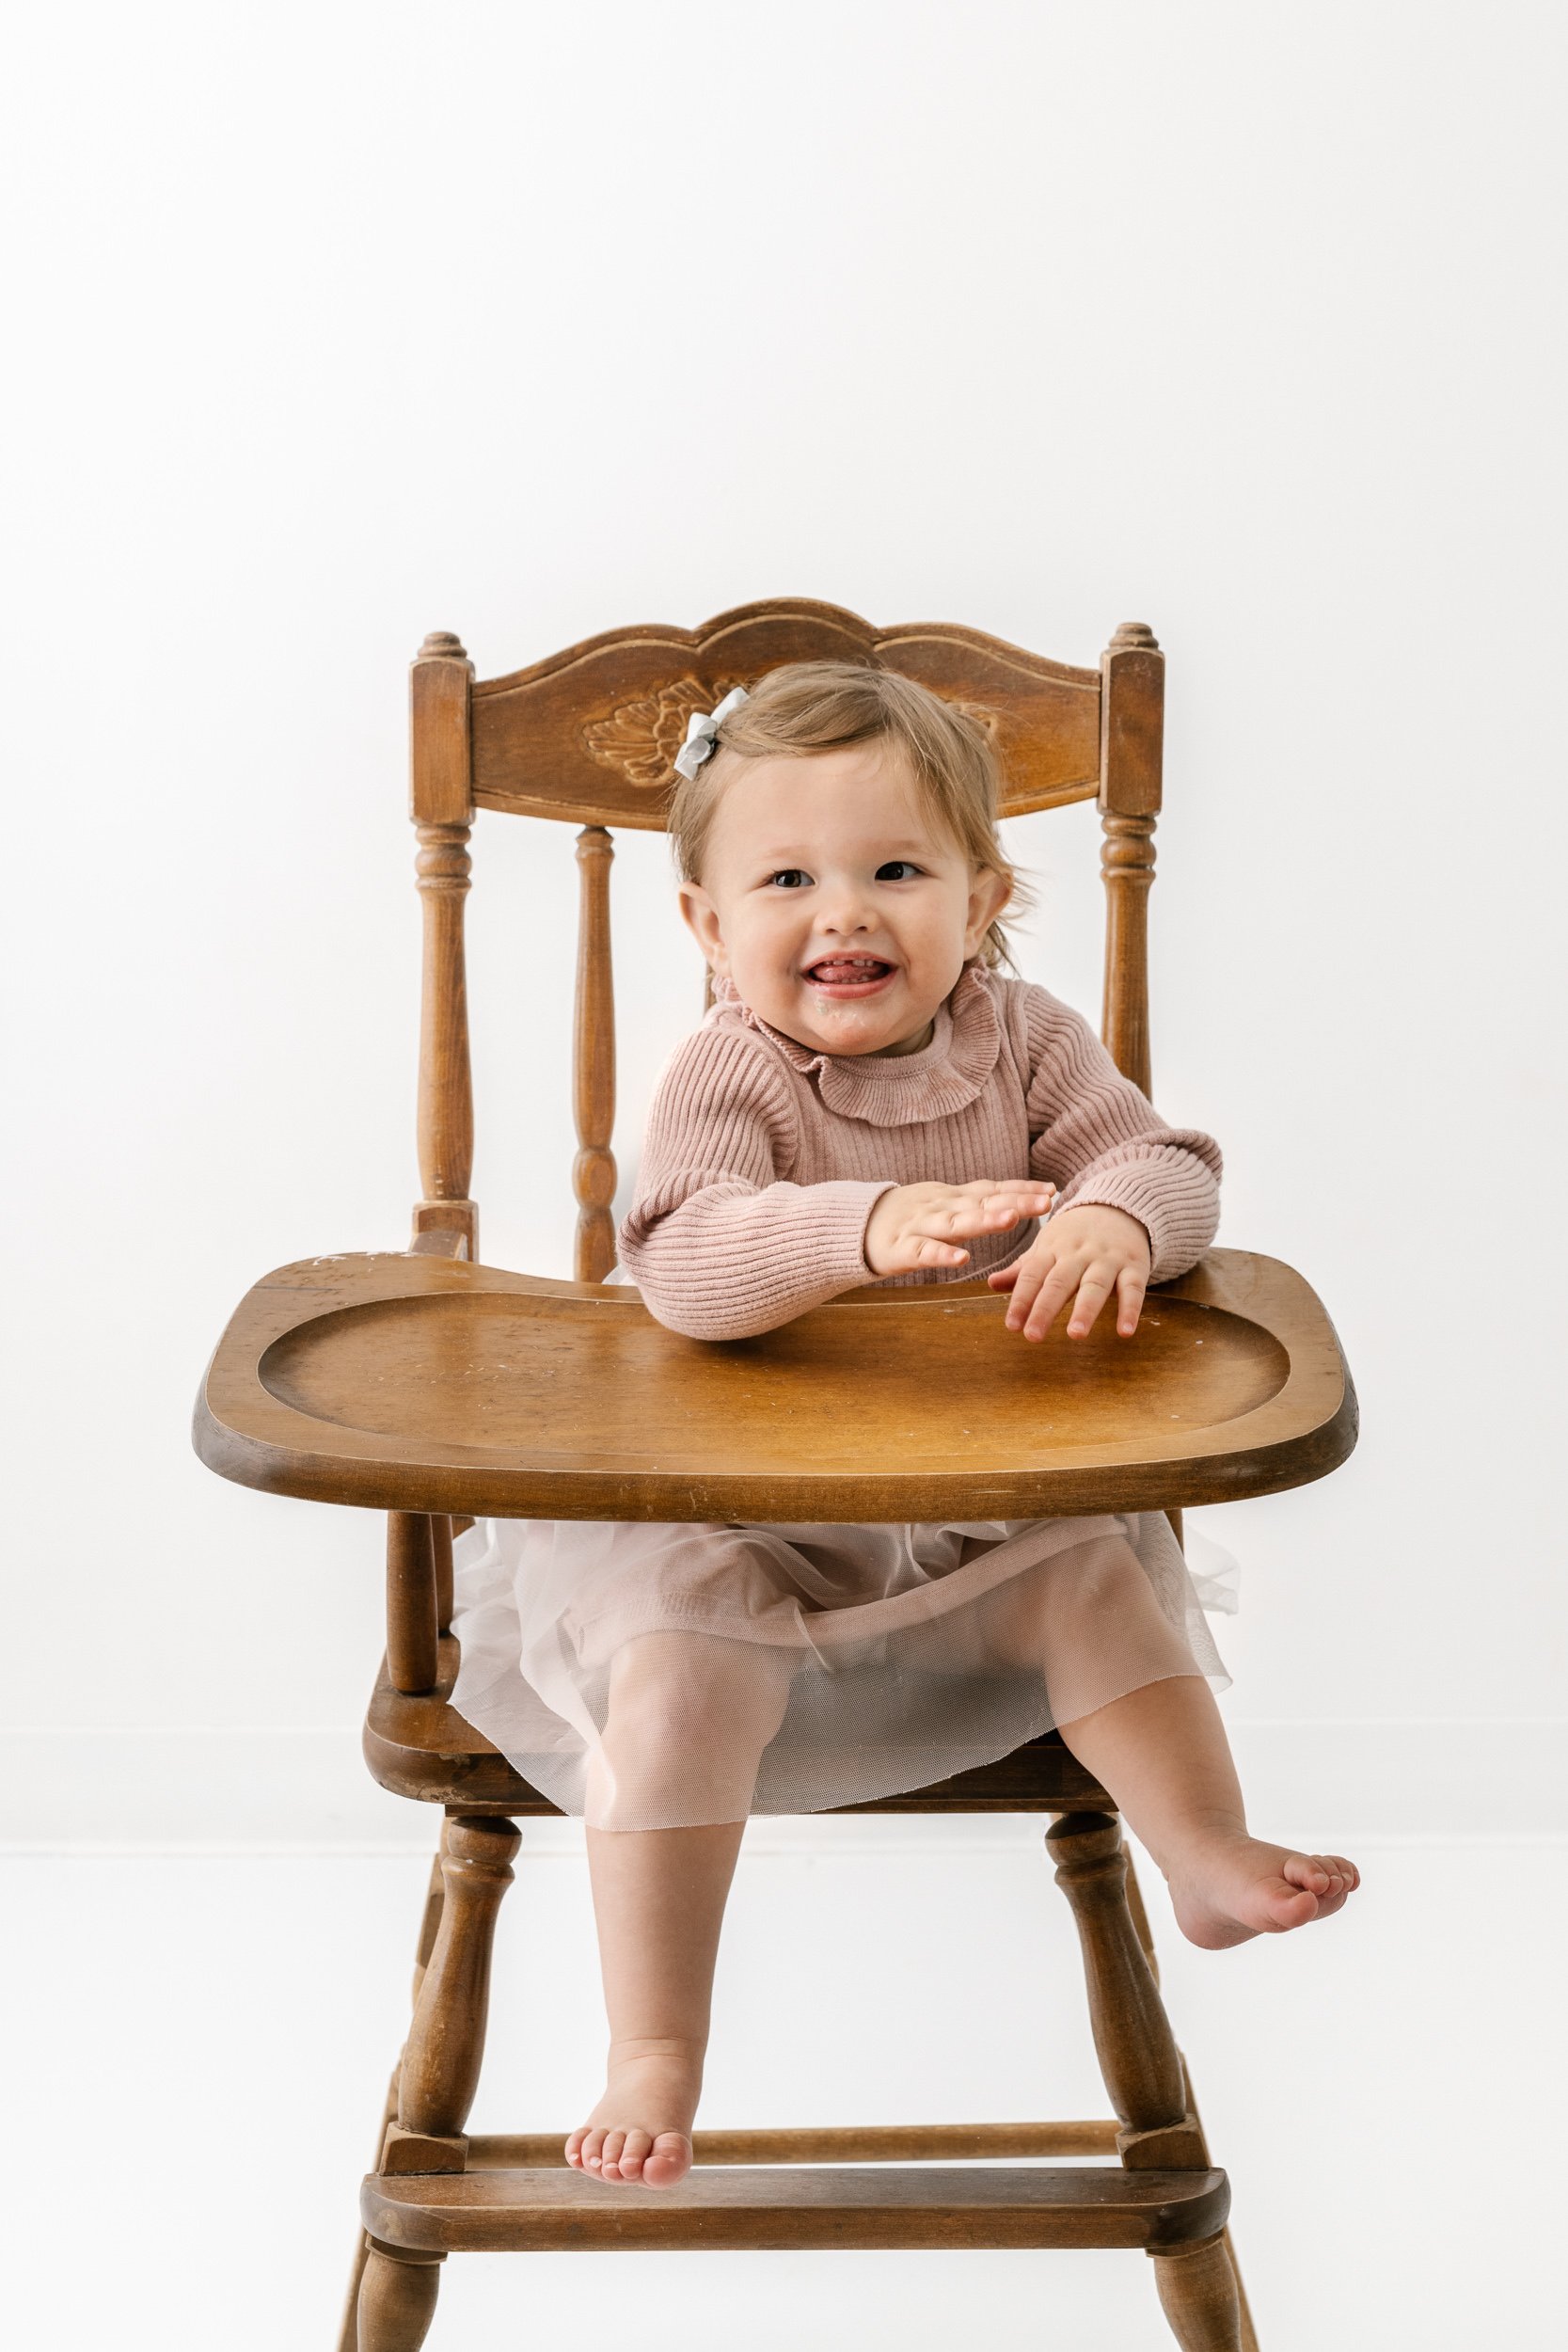  Nicole Hawkins Photography captures a portrait of a baby sitting in a vintage high chair in a studio. vintage high chair #NicoleHawkinsPhotography #NicoleHawkinsBabies #studiochildren #firstbirthday #studiophotography #girlsbirthdayportraits 